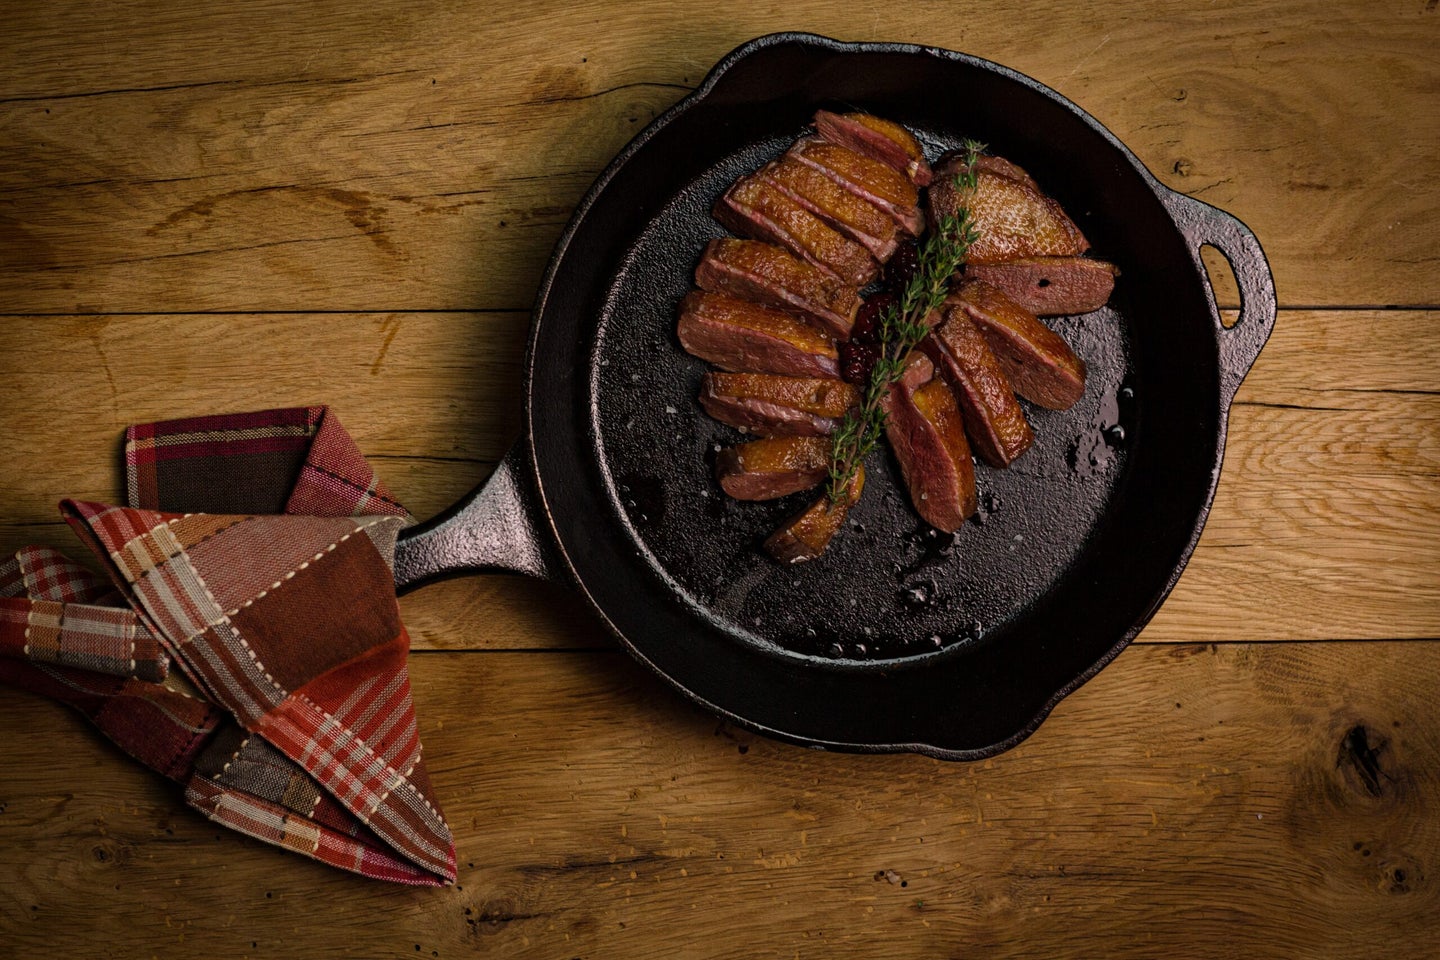 Sliced duck breast in a black cast iron skillet resting on a wooden table.